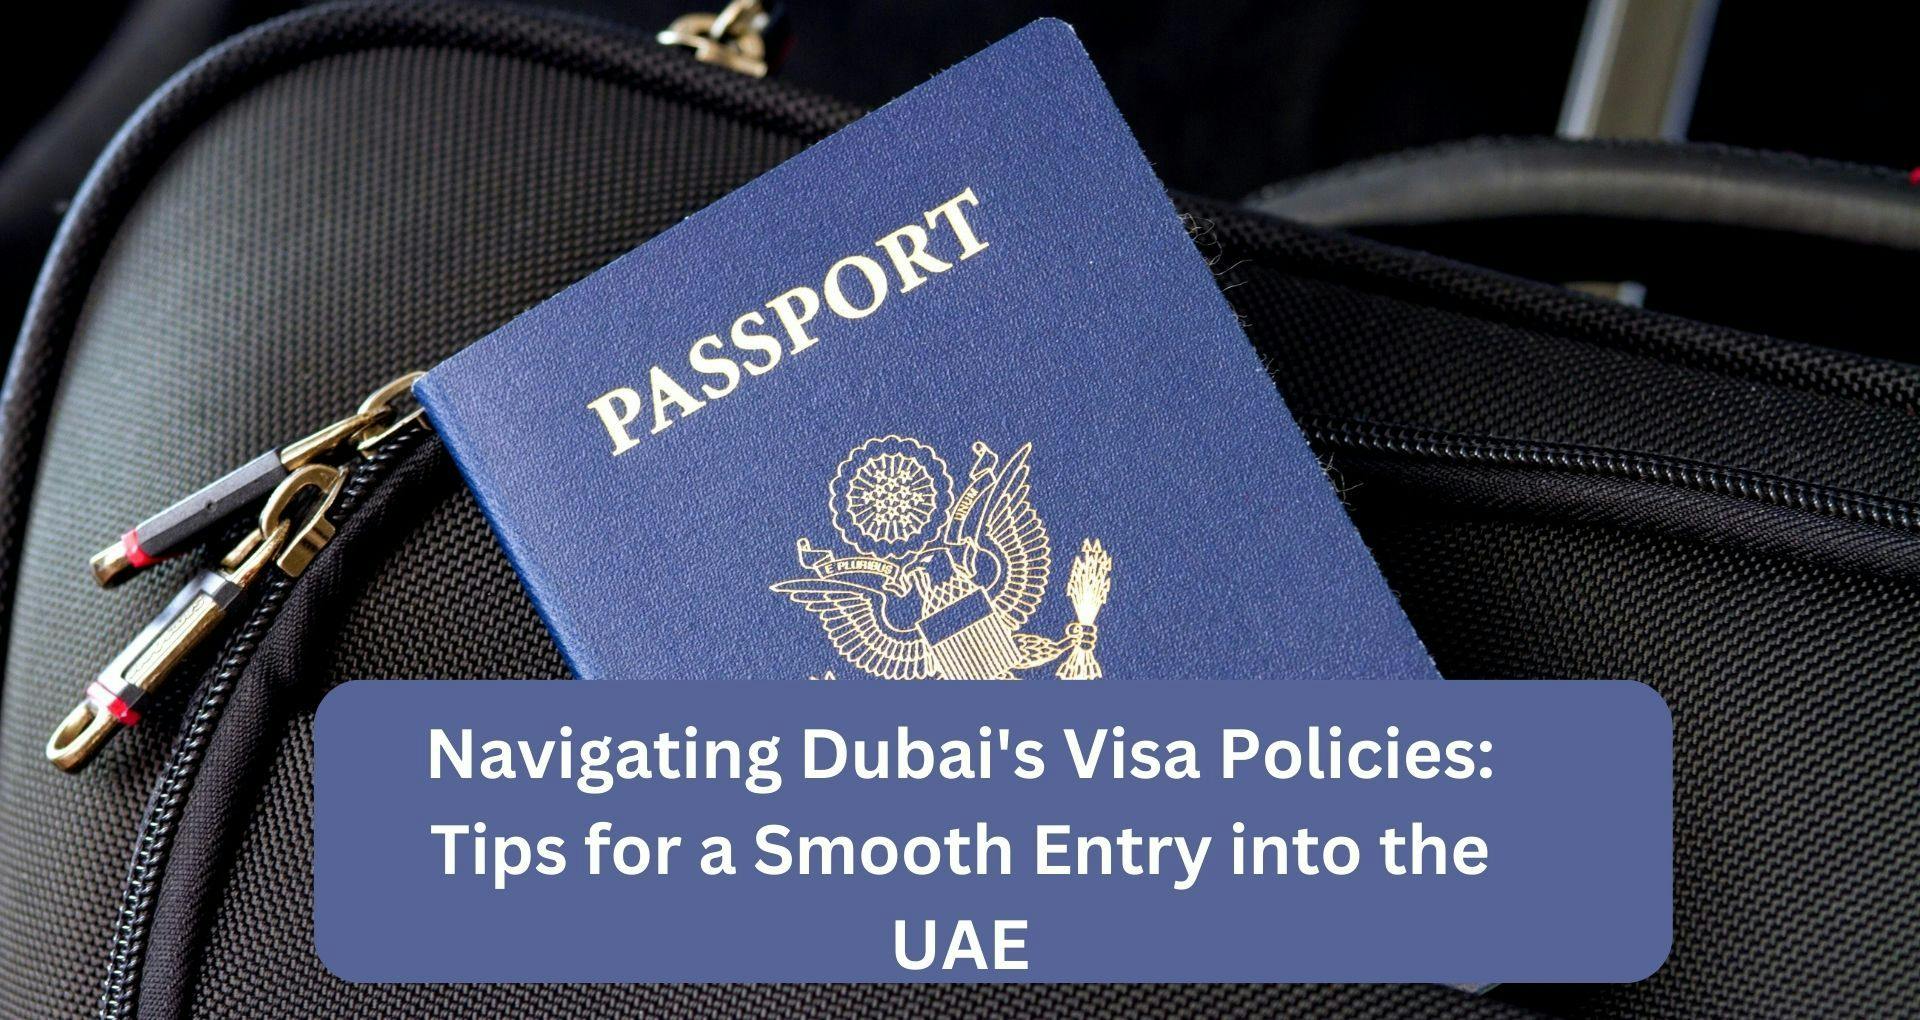 Tips for a Smooth Entry into the UAE